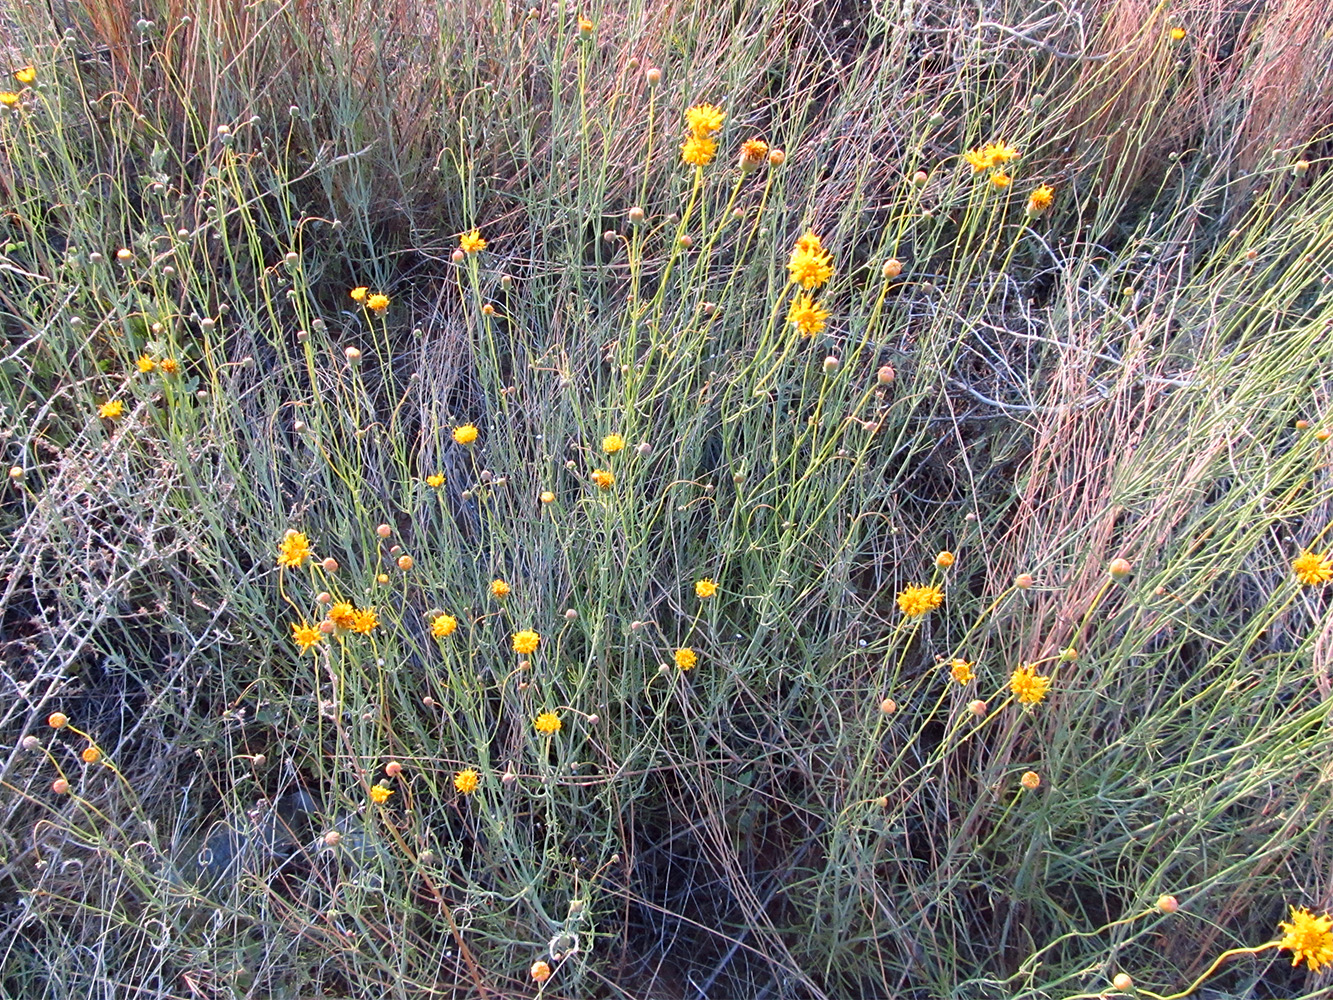 Plant with long spindly stems with narrow leaves and a yellow flower